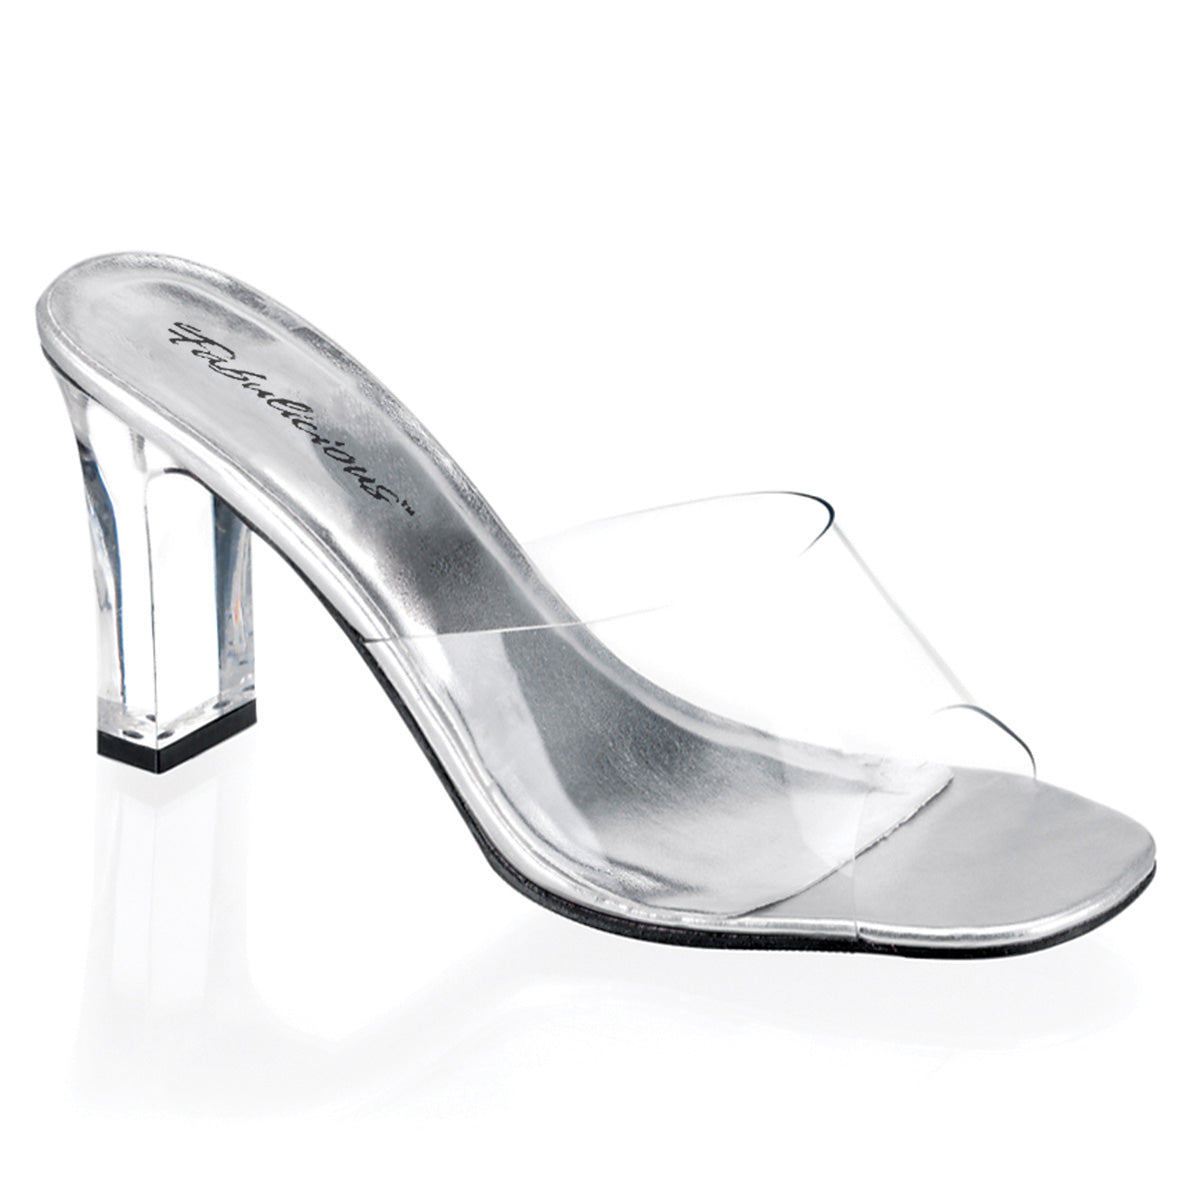 ROMANCE-301 Fabulicious 3 Inch Heel Clear Sexy Shoes – Pole Dancing ...